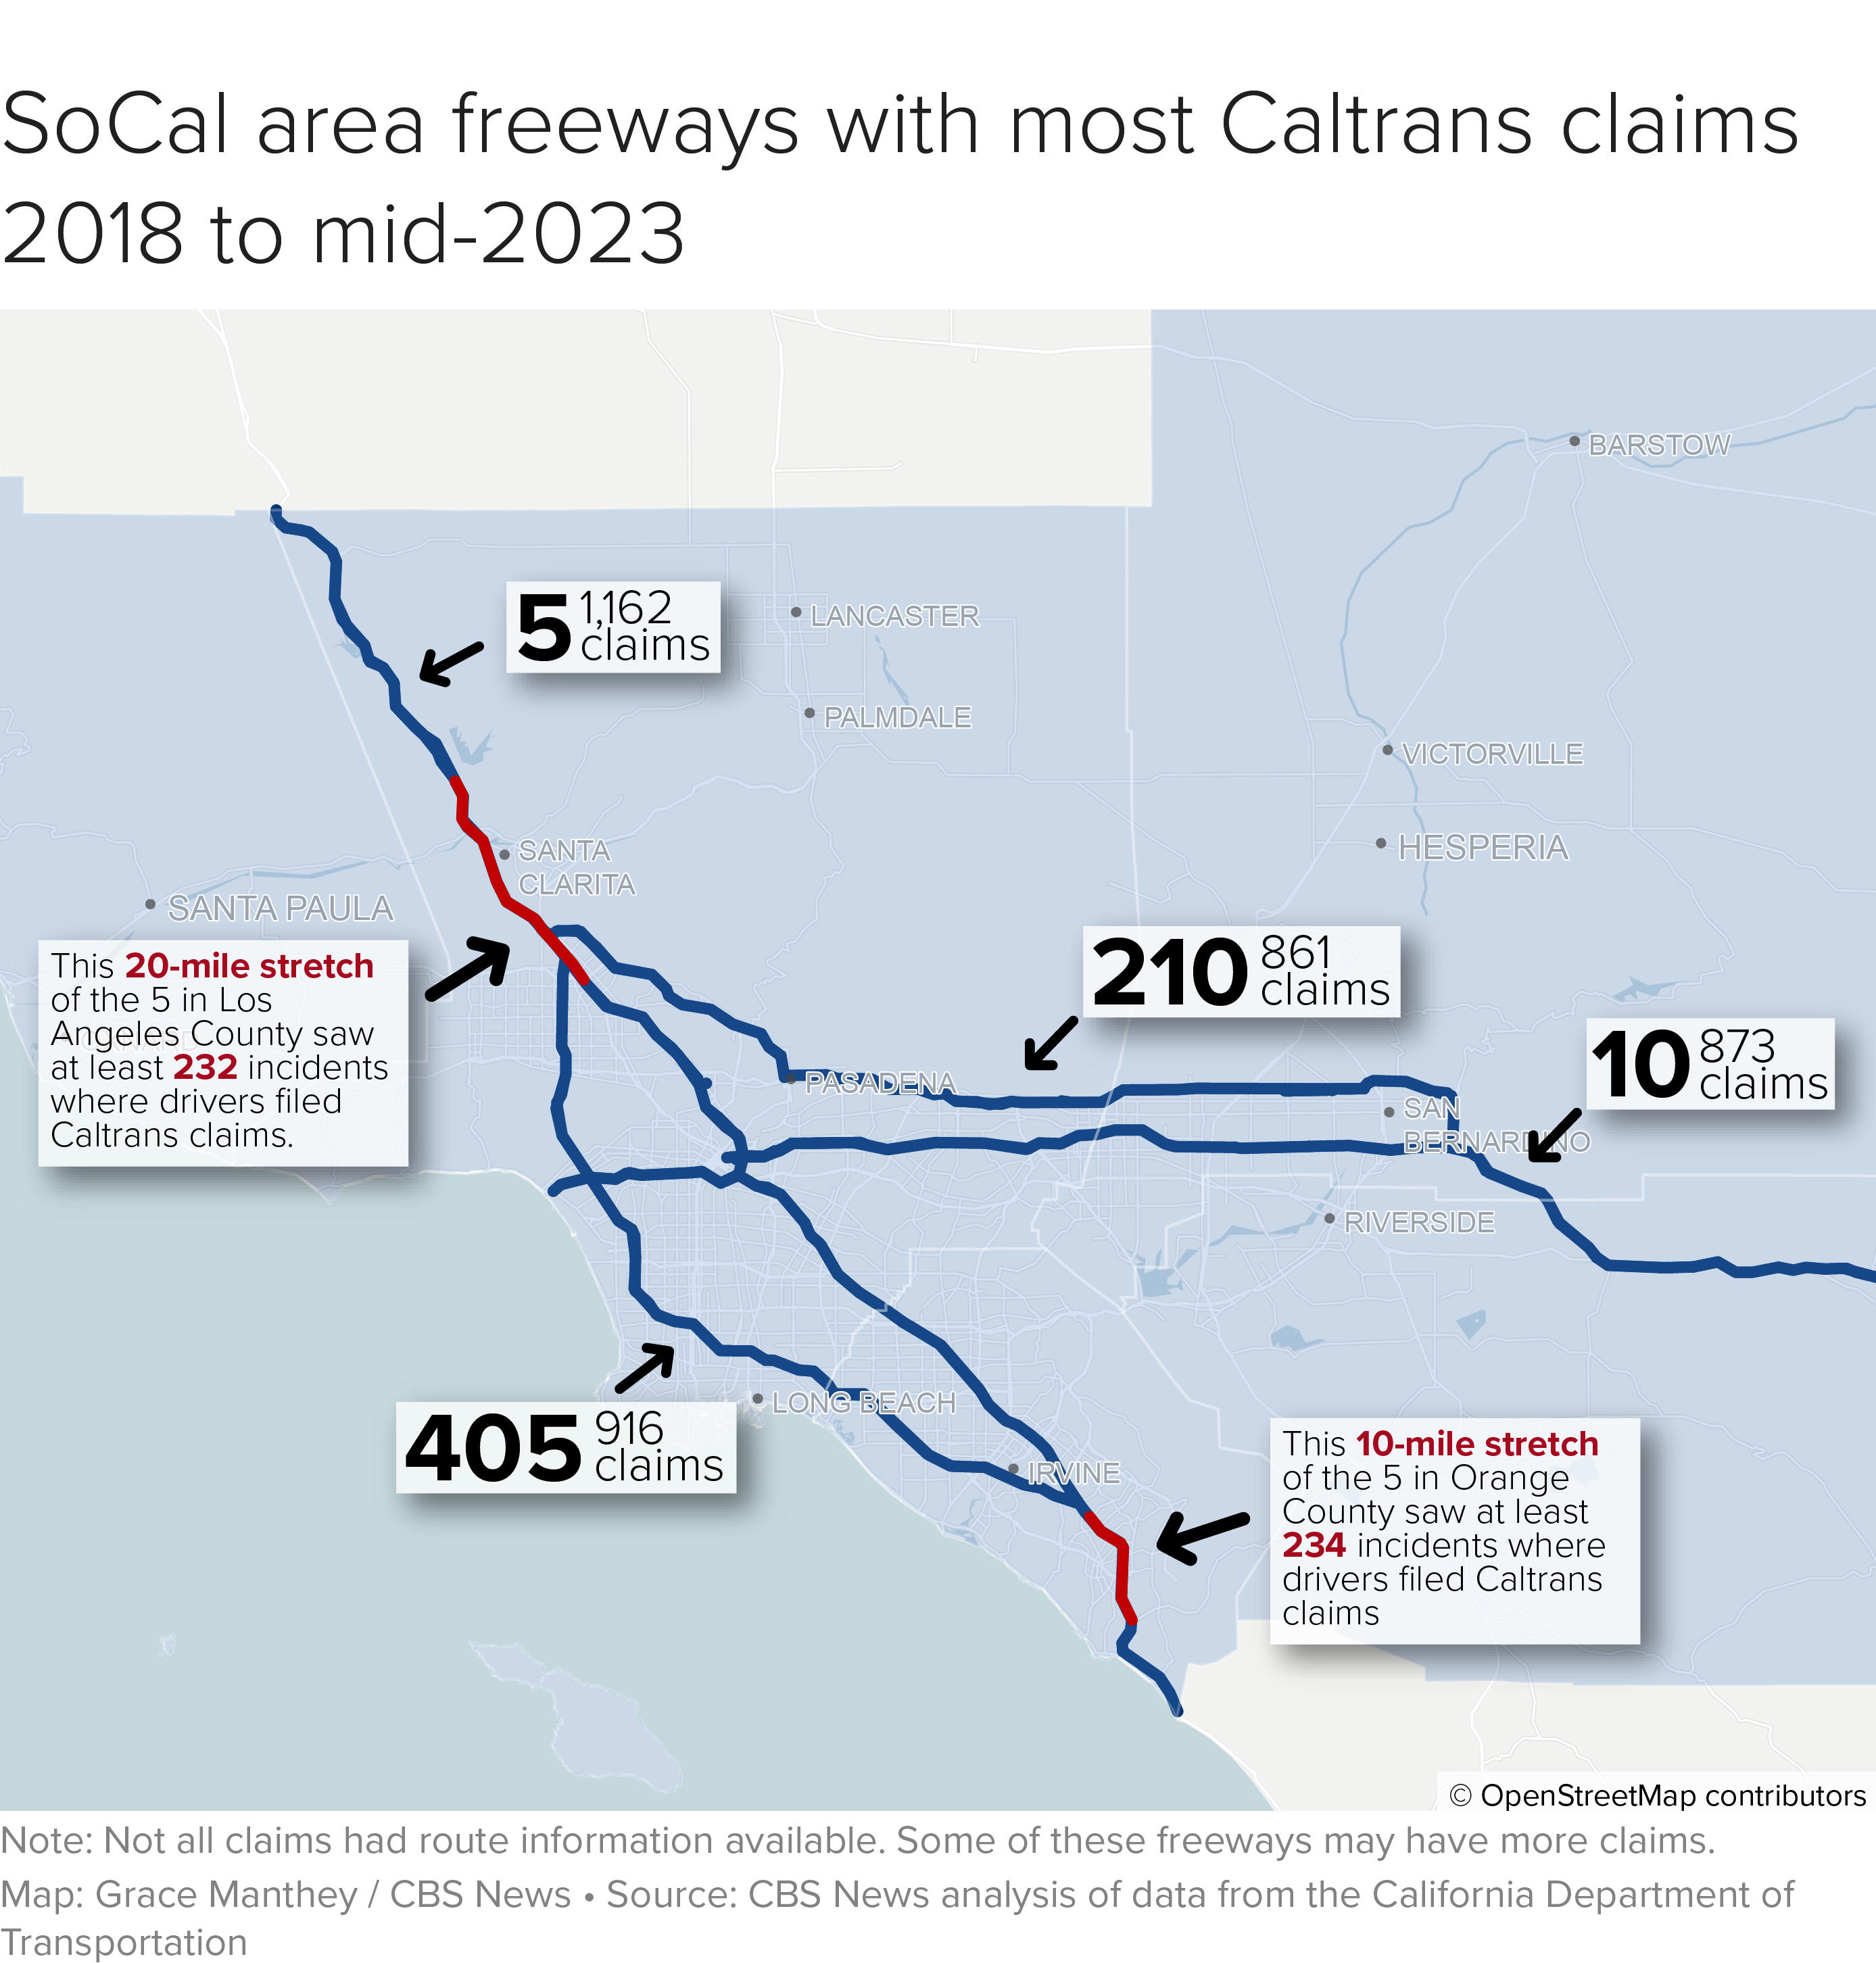 In Southern California, the 5 freeway had the most incidents resulting in claims with problem areas in Orange County between Laguna Hills and San Juan Capistrano and from San Fernando through Santa Clarita up to Castaic. There were also a lot of claims on the 405, the 10 and the 210. 